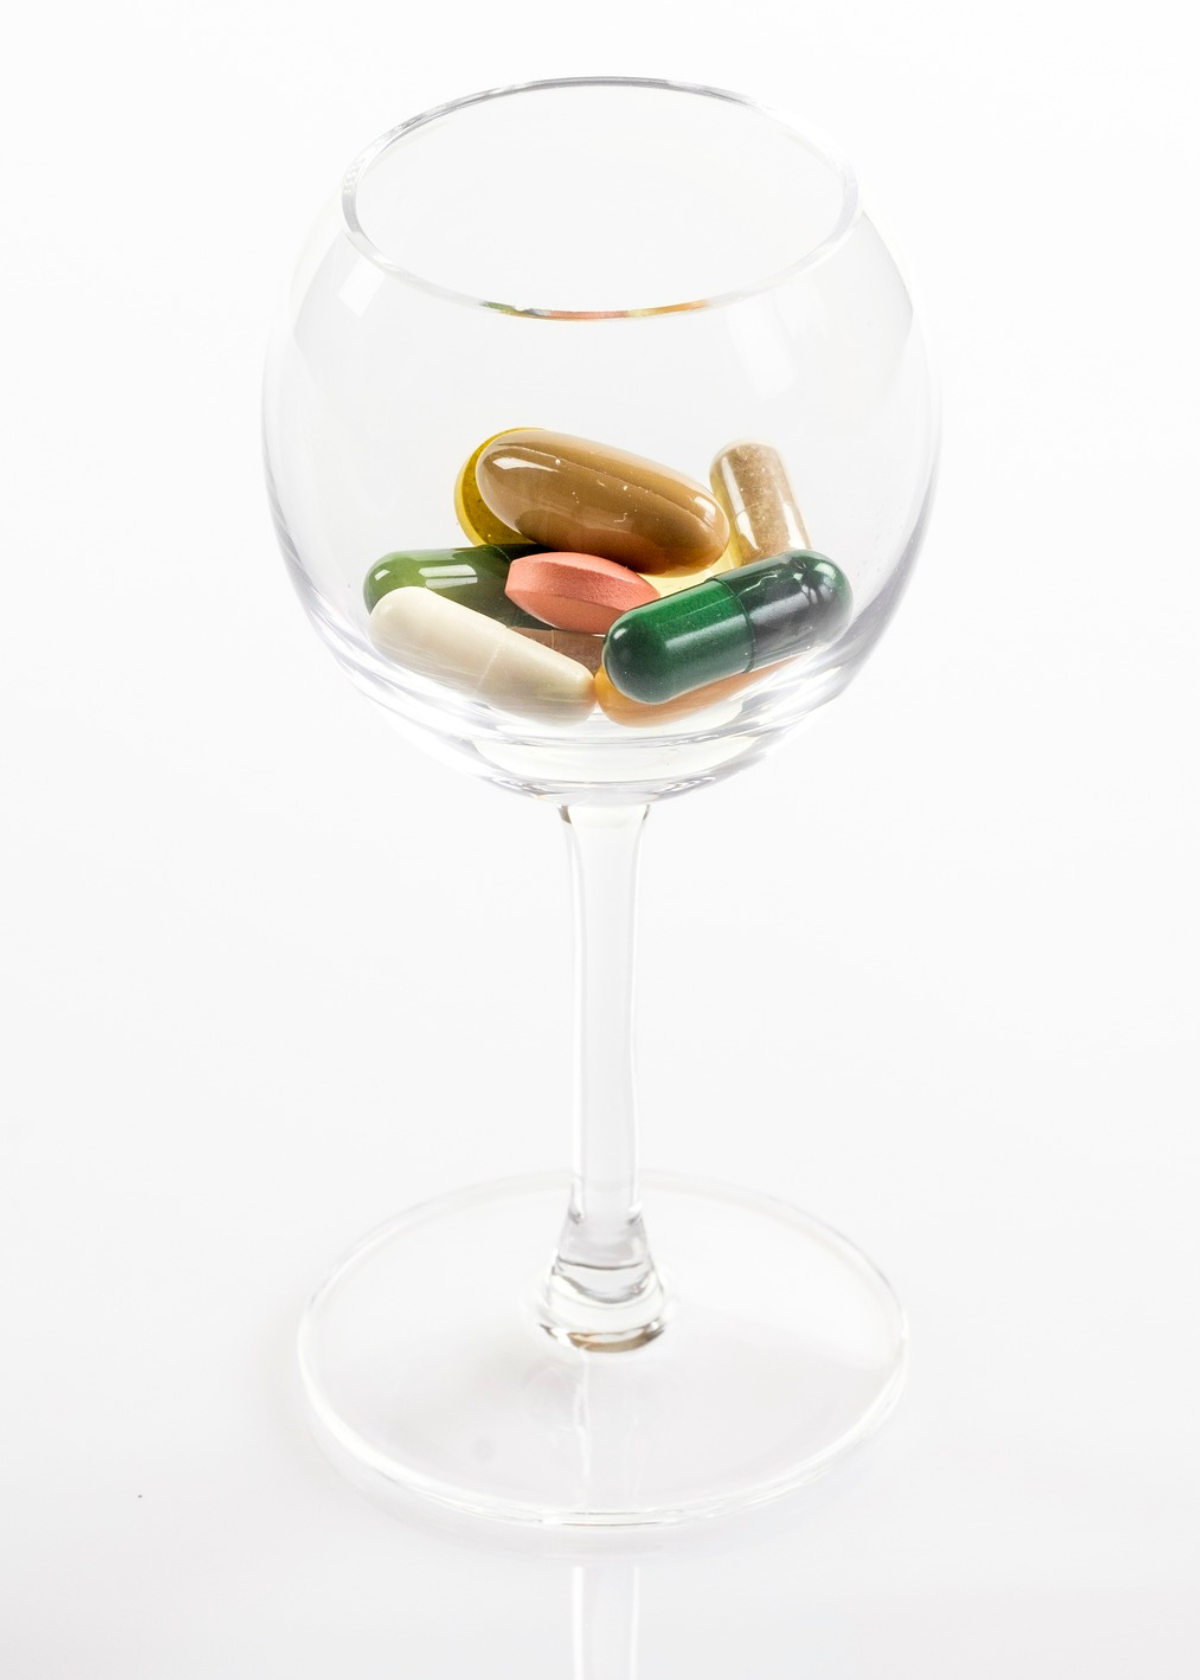 5 Best Vitamins & Supplements Your Body Needs To Stay Healthy